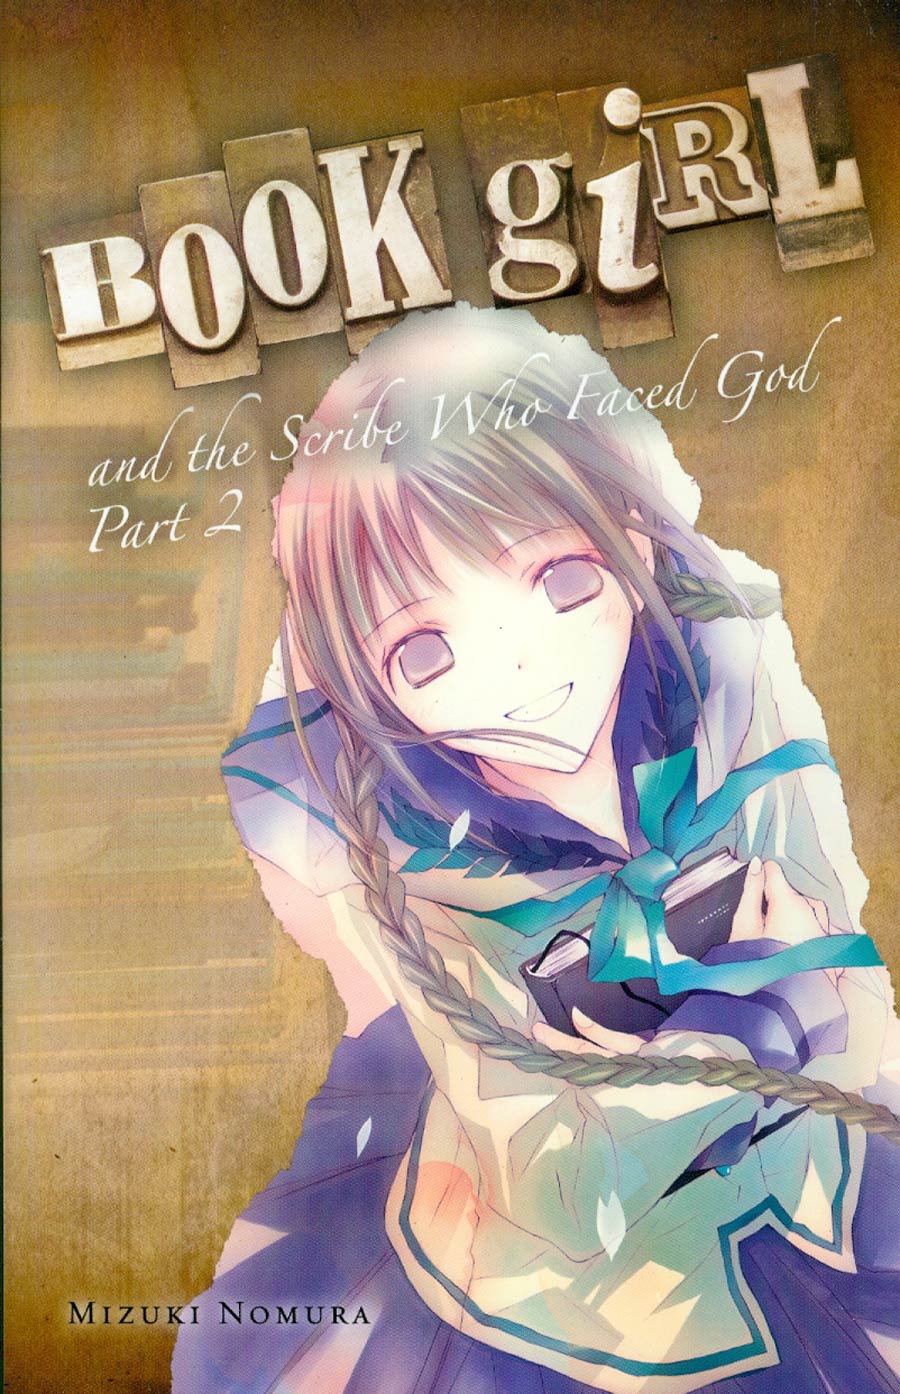 Book Girl And The Scribe Who Faced God Part 2 Novel